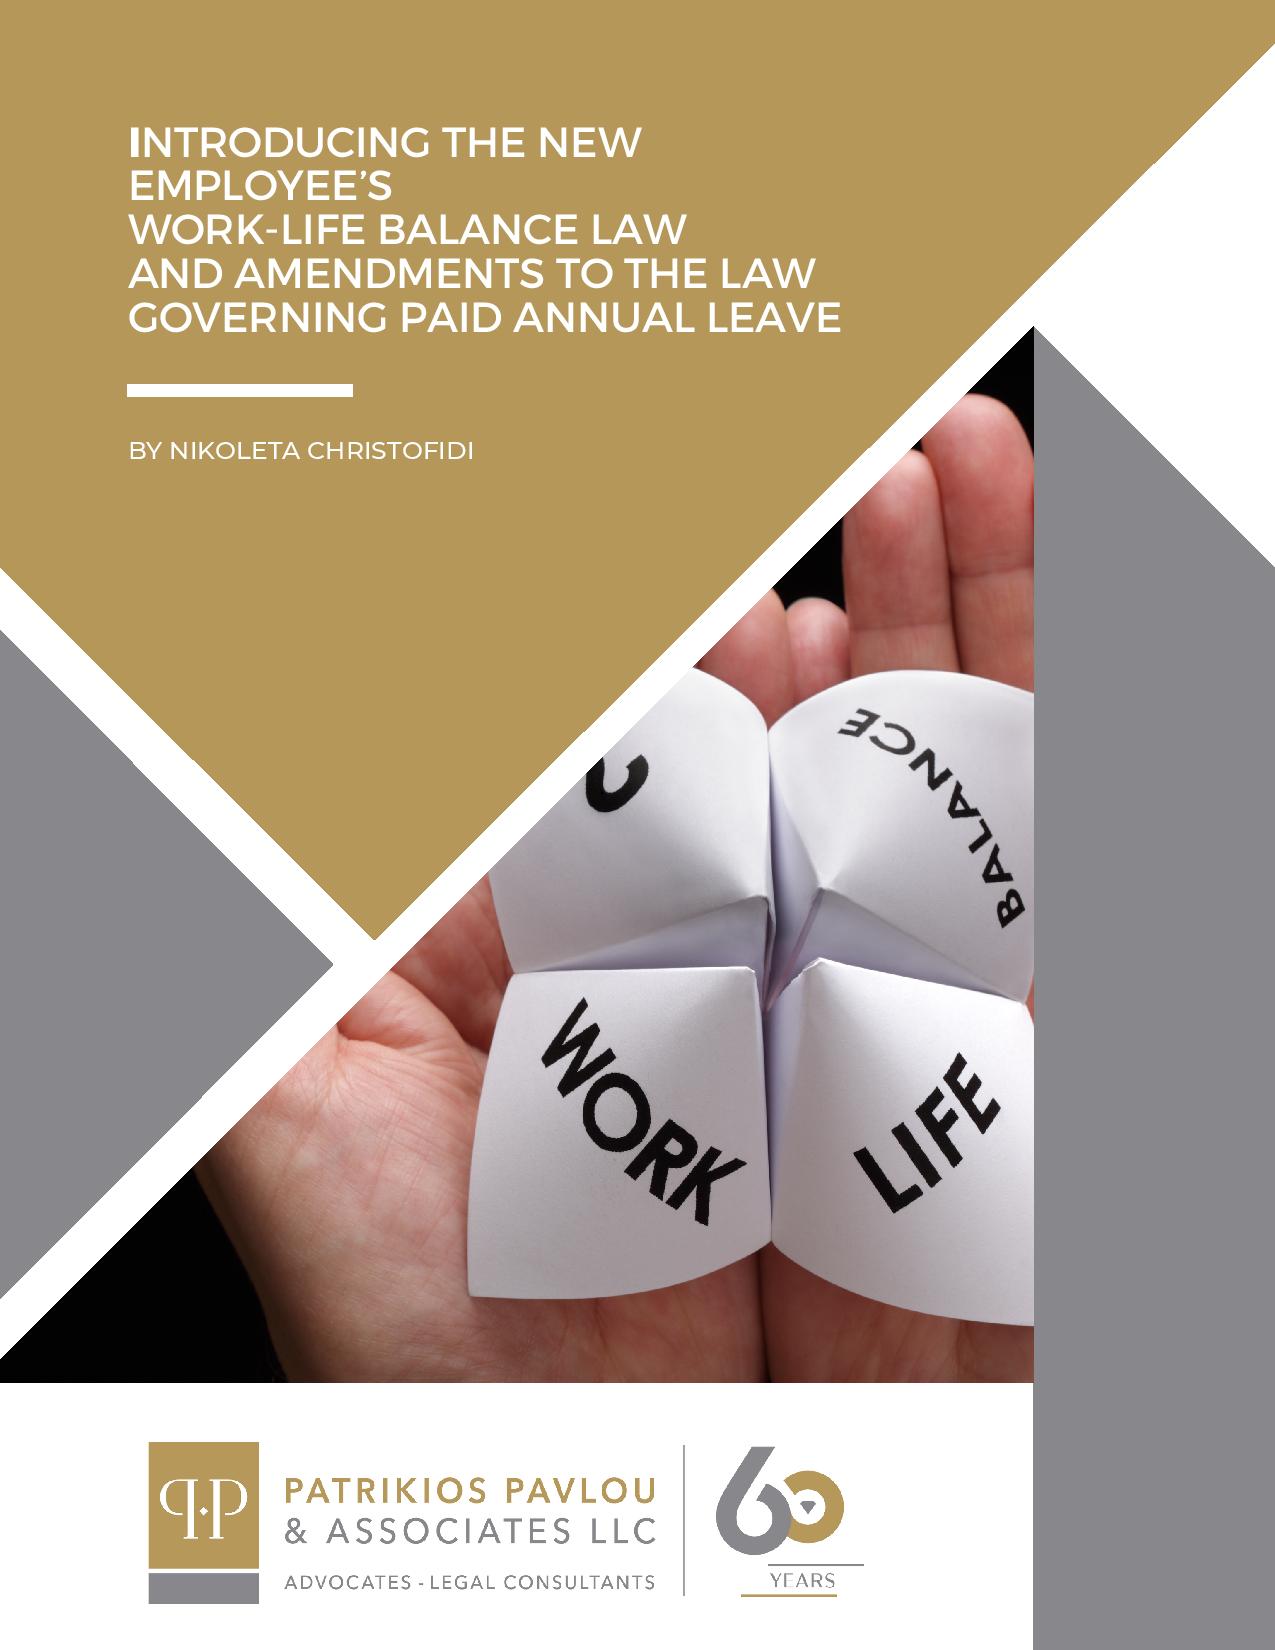 Introducing the new employee’s work-life balance law